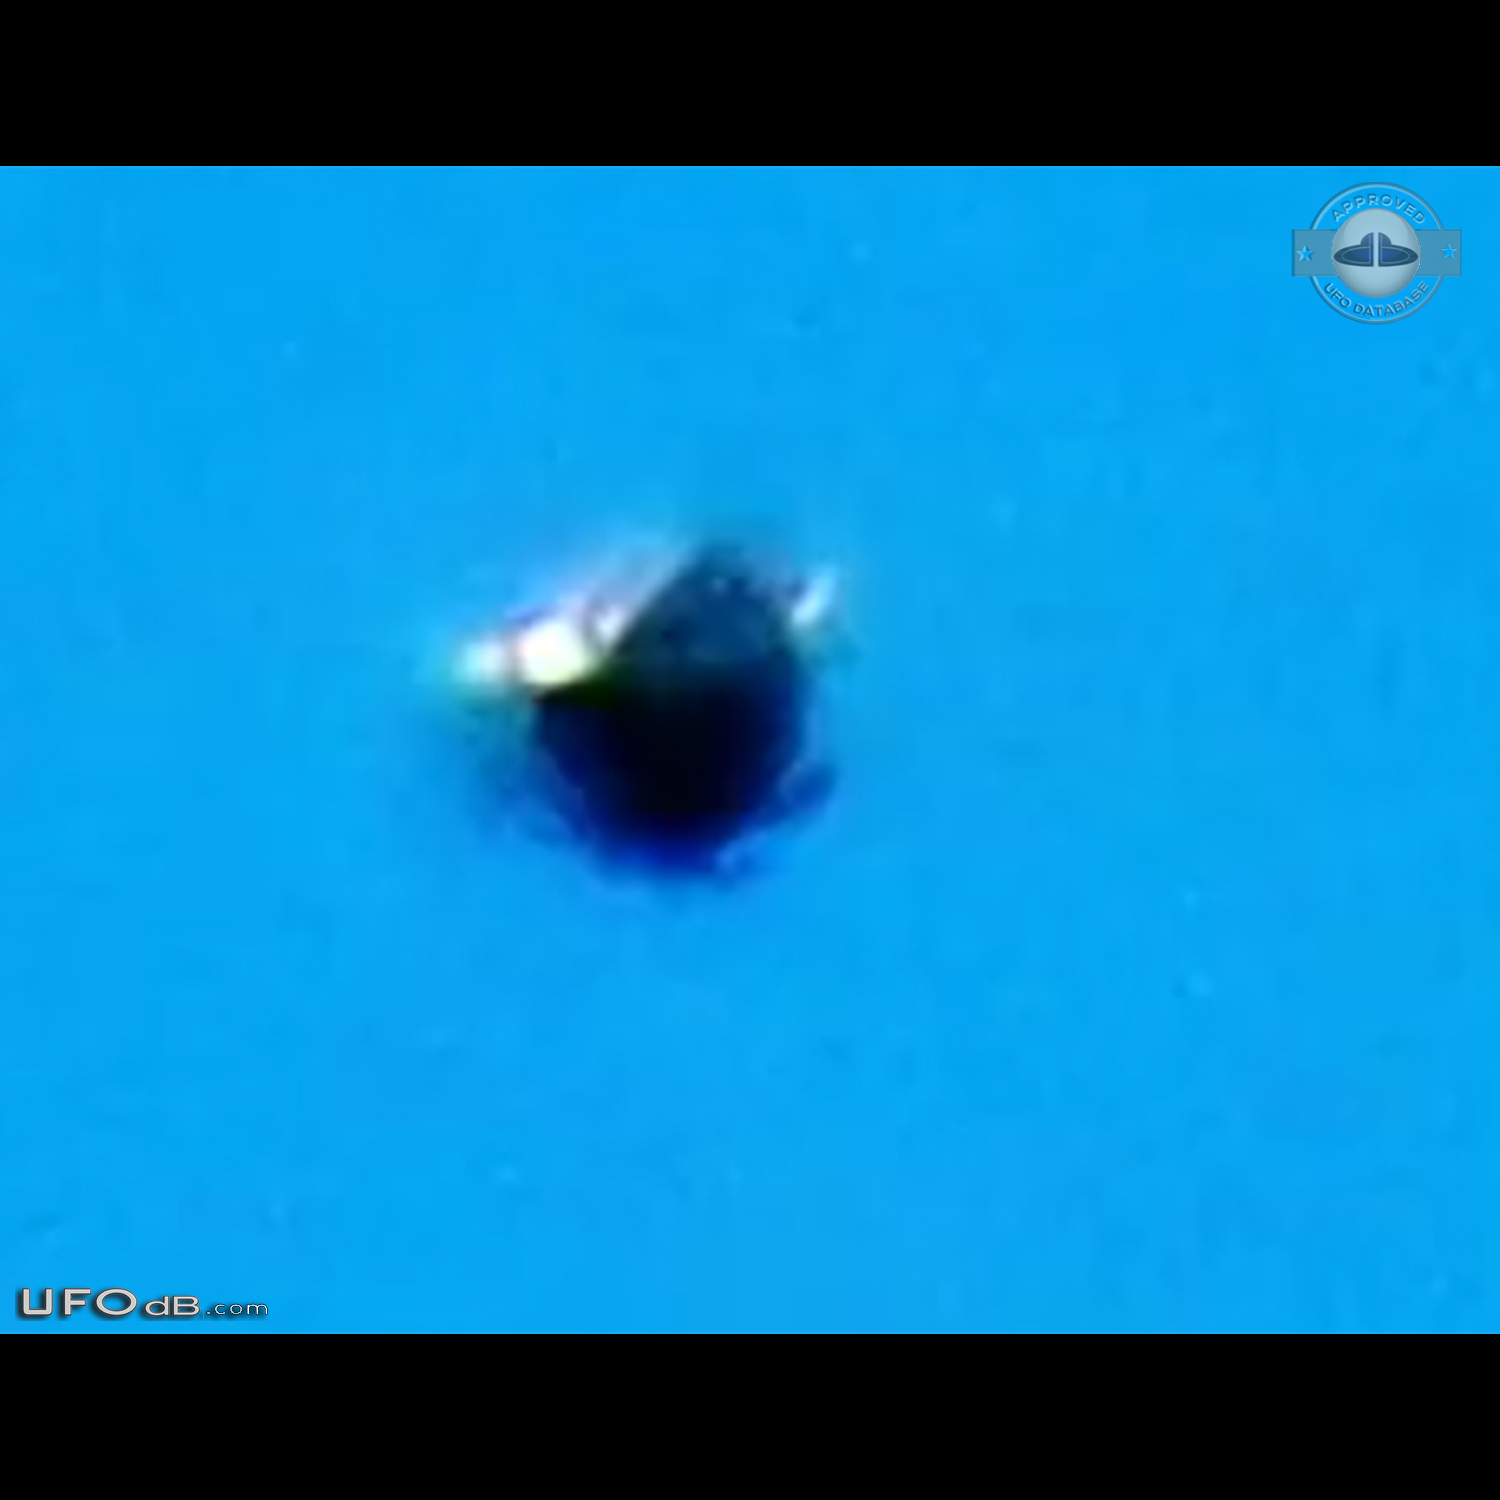 Jerky and strange UFO seen in Scarborough, Ontario canada 2015 UFO Picture #685-6